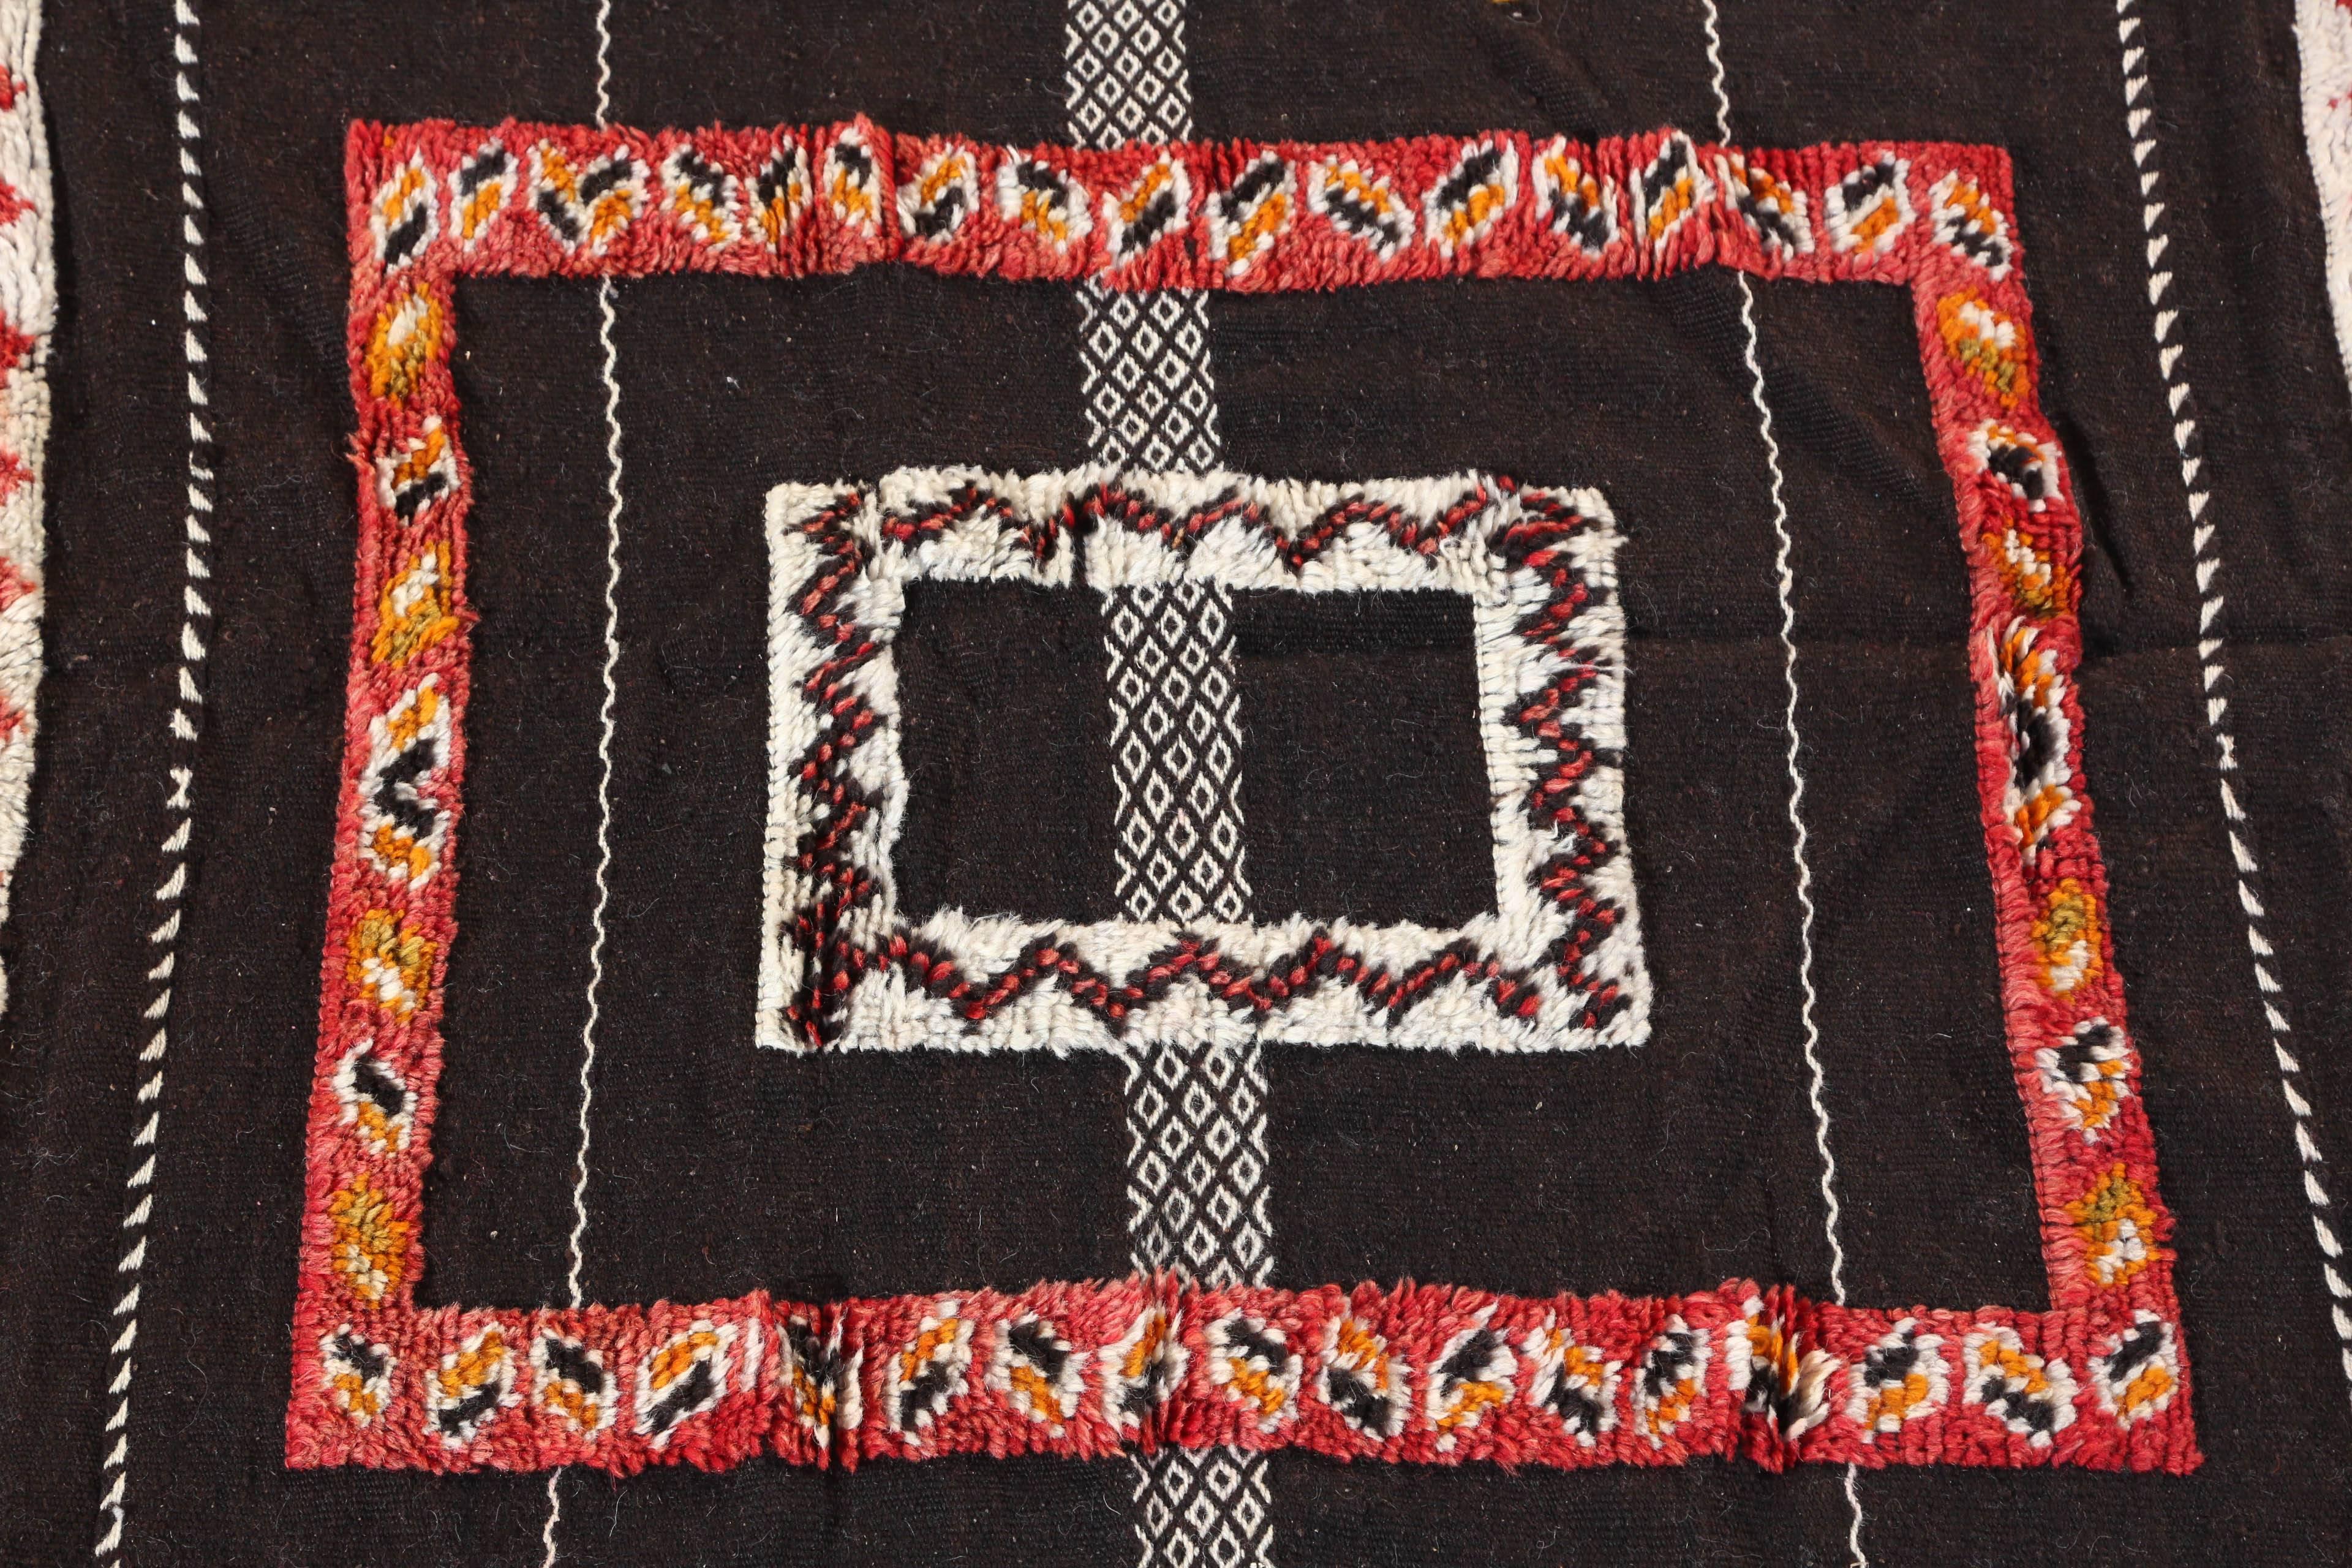 Moroccan vintage tribal African rug with black red and ivory colors.
Square carpet with rows and geometric abstract modern designs. 
Organic dyes wool hand-woven by the Berber women in Morocco.